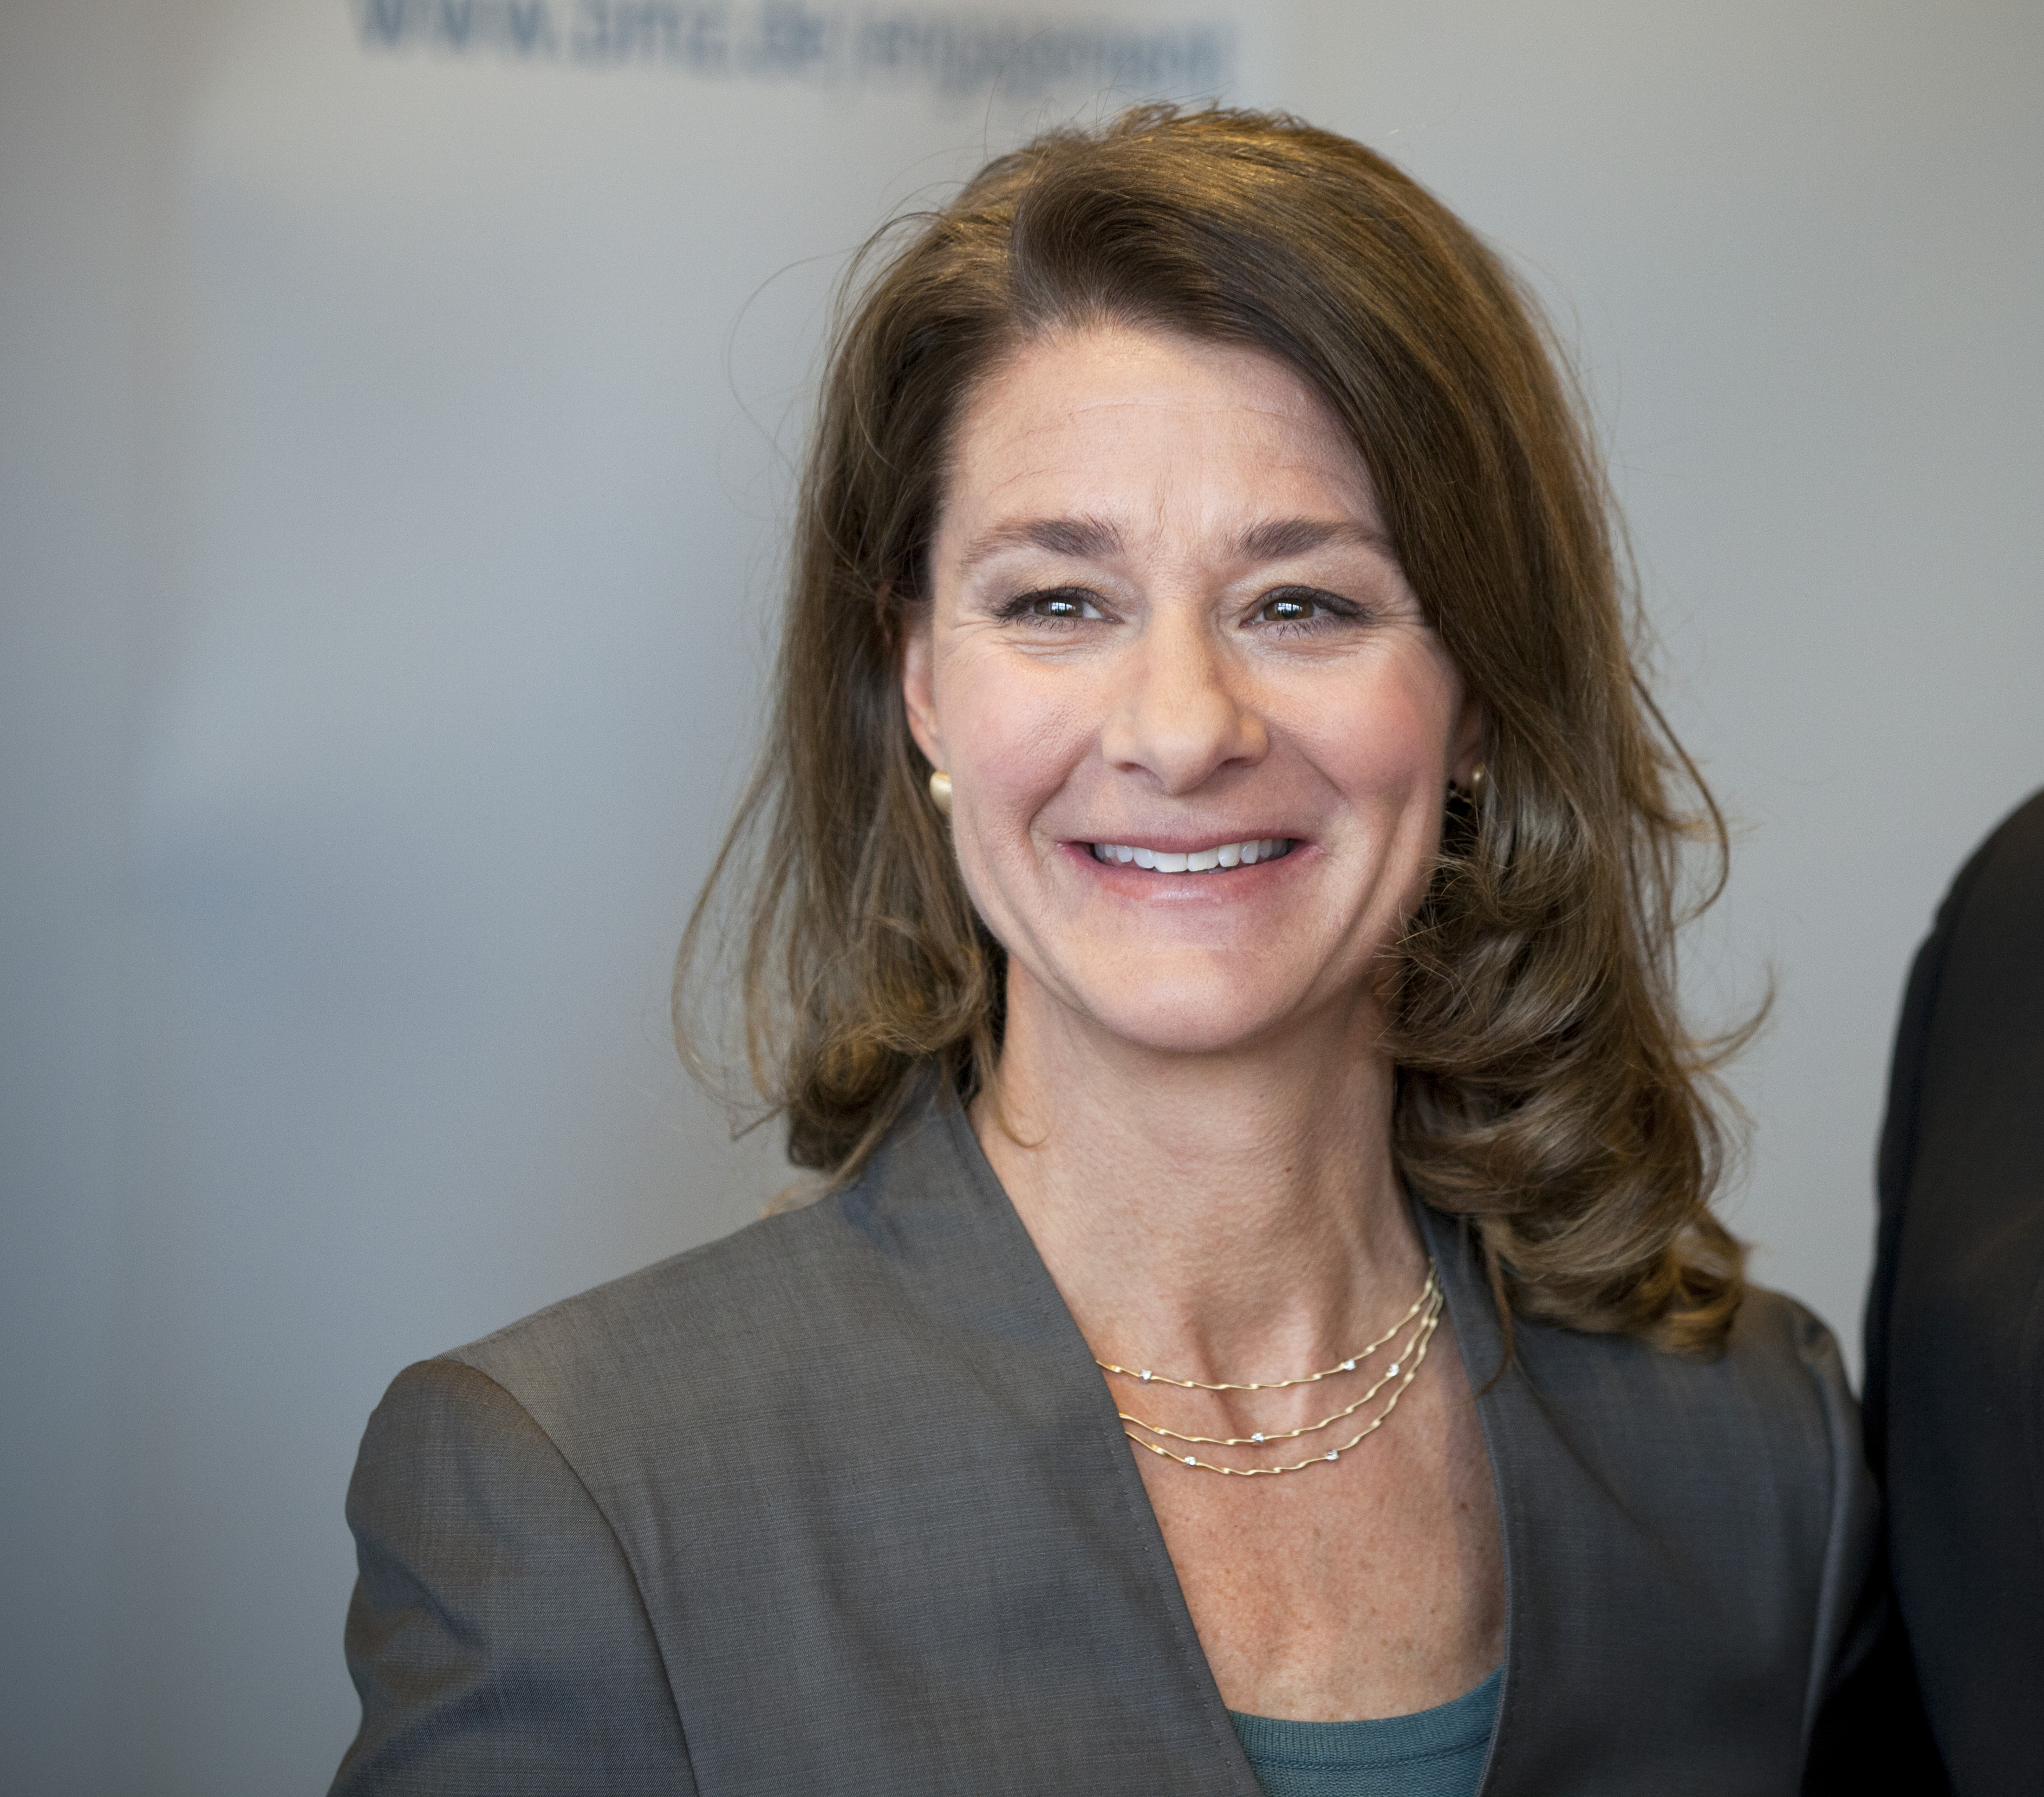 Melinda Gates: it's time to save the rest of the babies (Thomas Imo; Photothek via Getty Images)